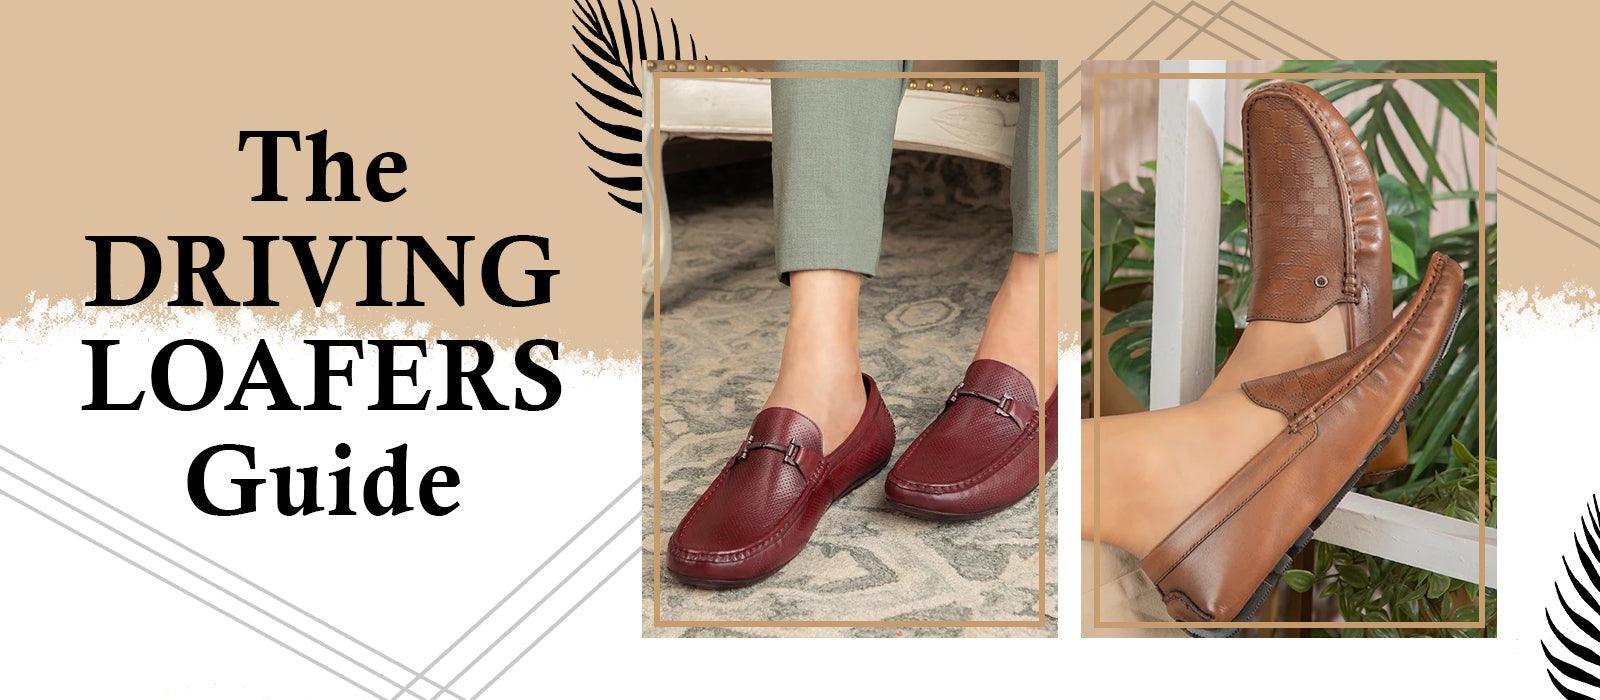 5 Reasons Why Every Man Should Own Driving Loafers - Tresmode